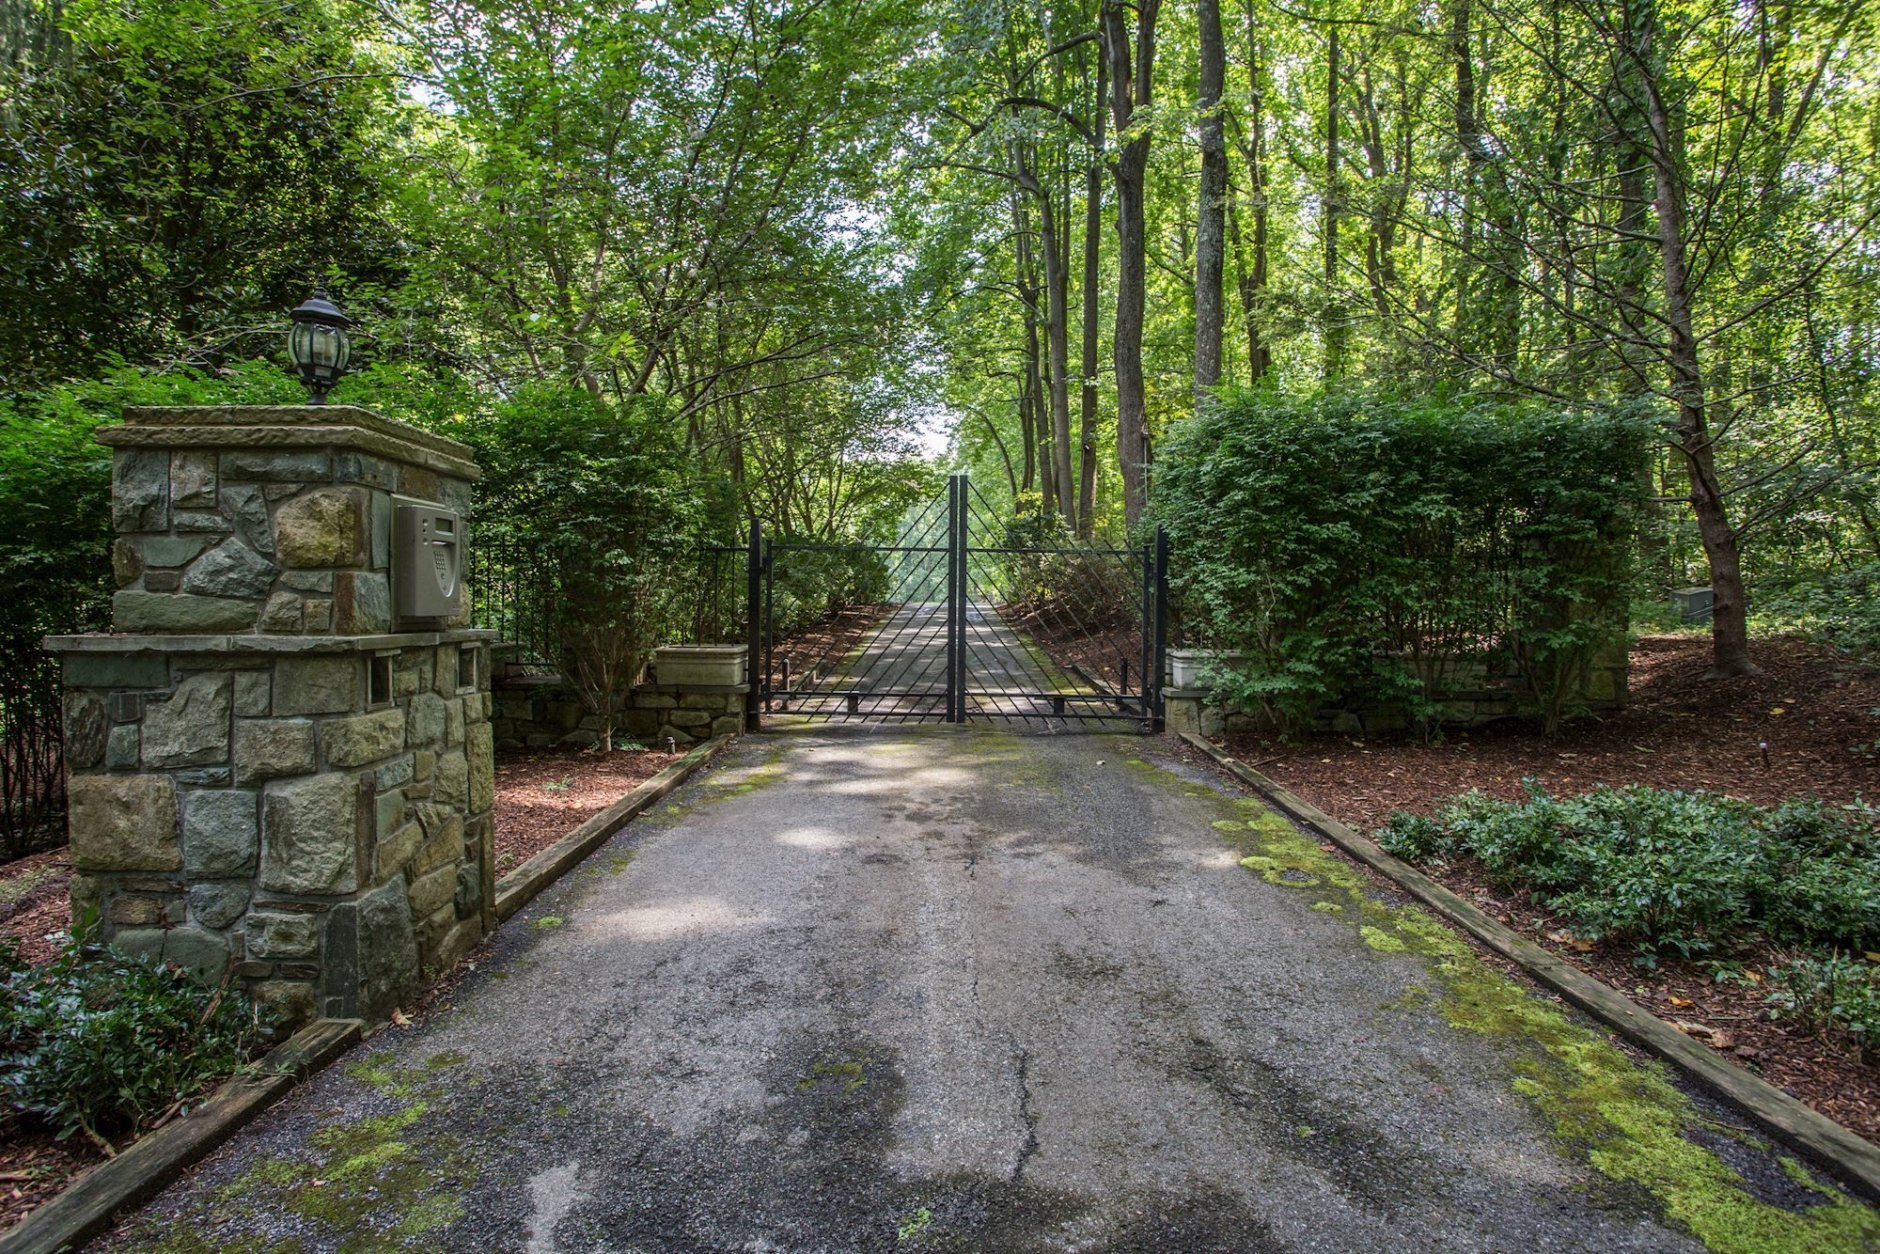 The front security gate at Tom Clancy's Peregrine Cliff estate. (Courtesy Cummings & Co. Realtors)